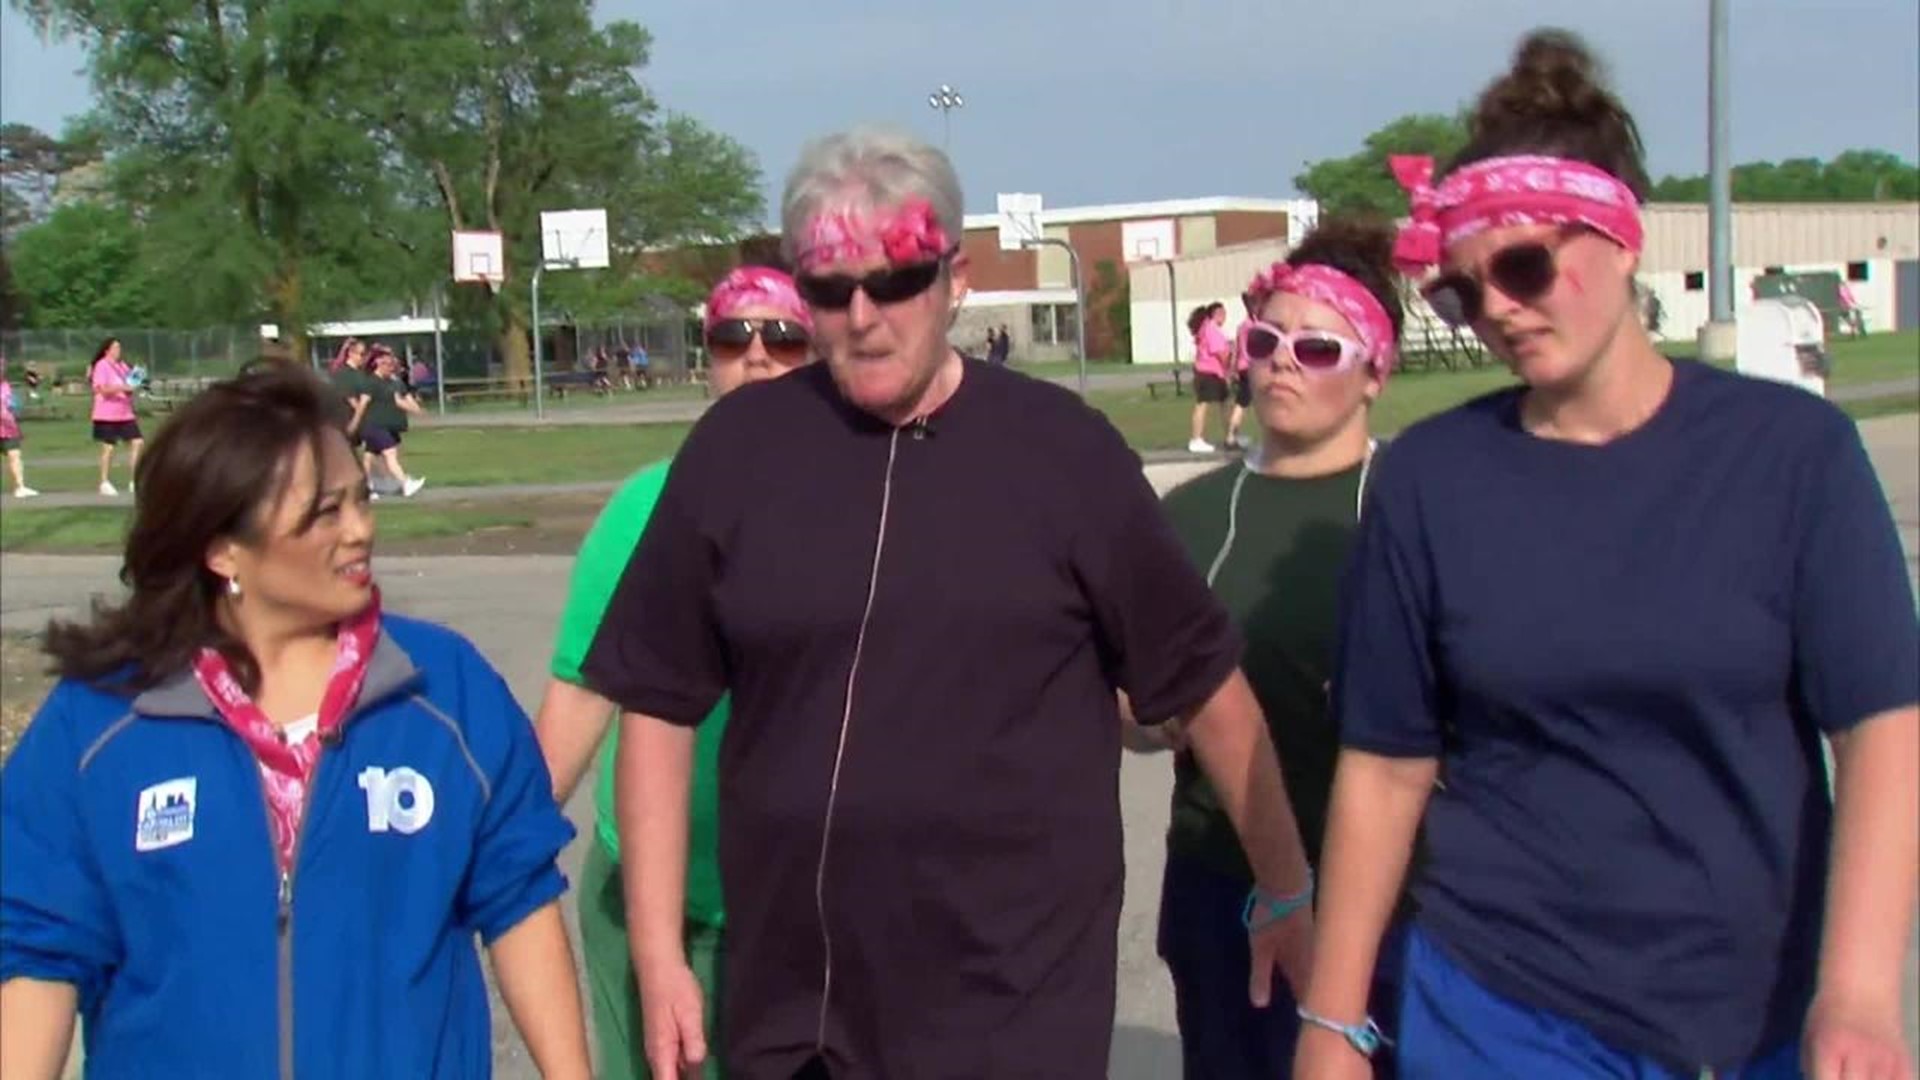 Marysville prison holds annual 5k event to raise money for breast